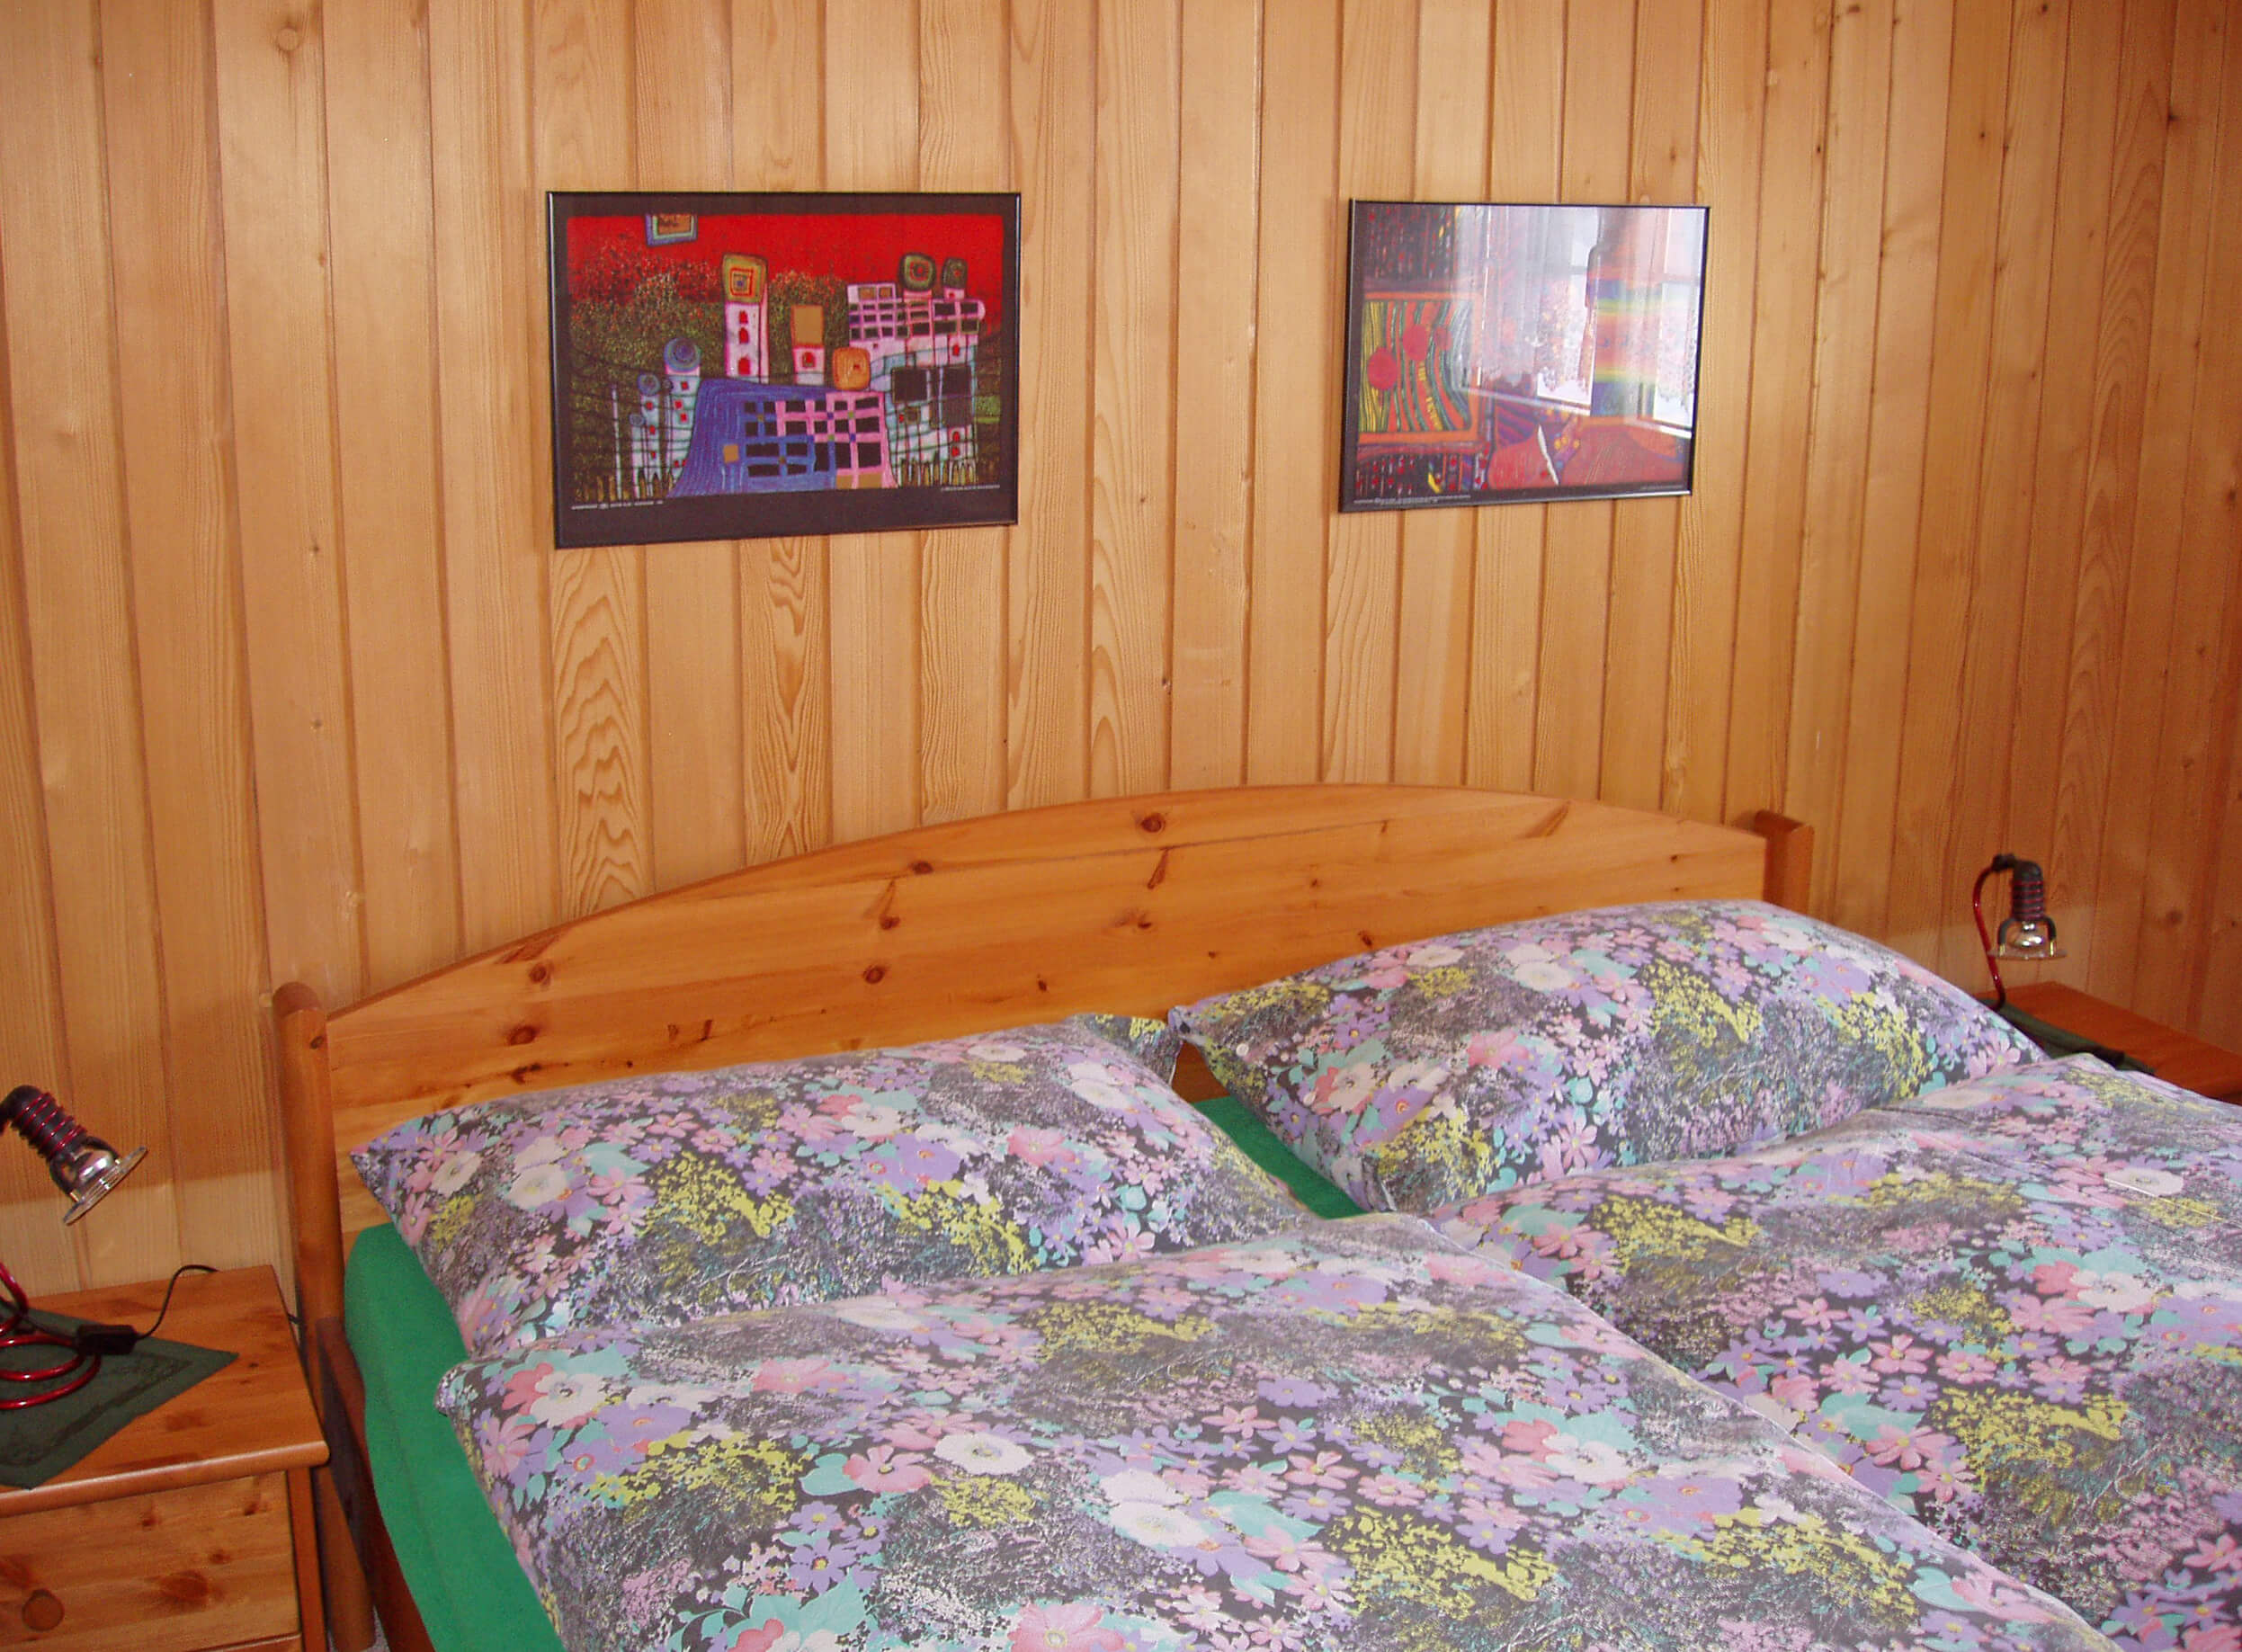 Bedroom with double bed and bedside table